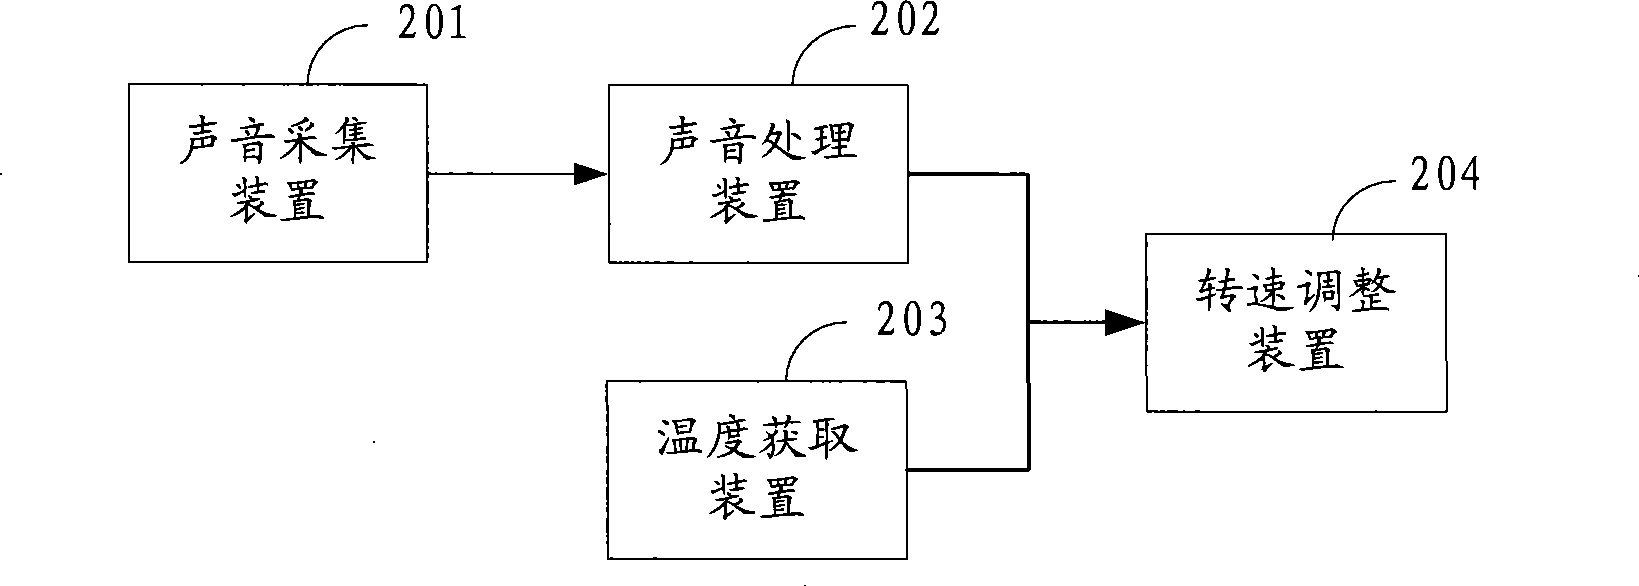 Method, system and device for adjusting rotating speed of radiating equipment in data processing equipment